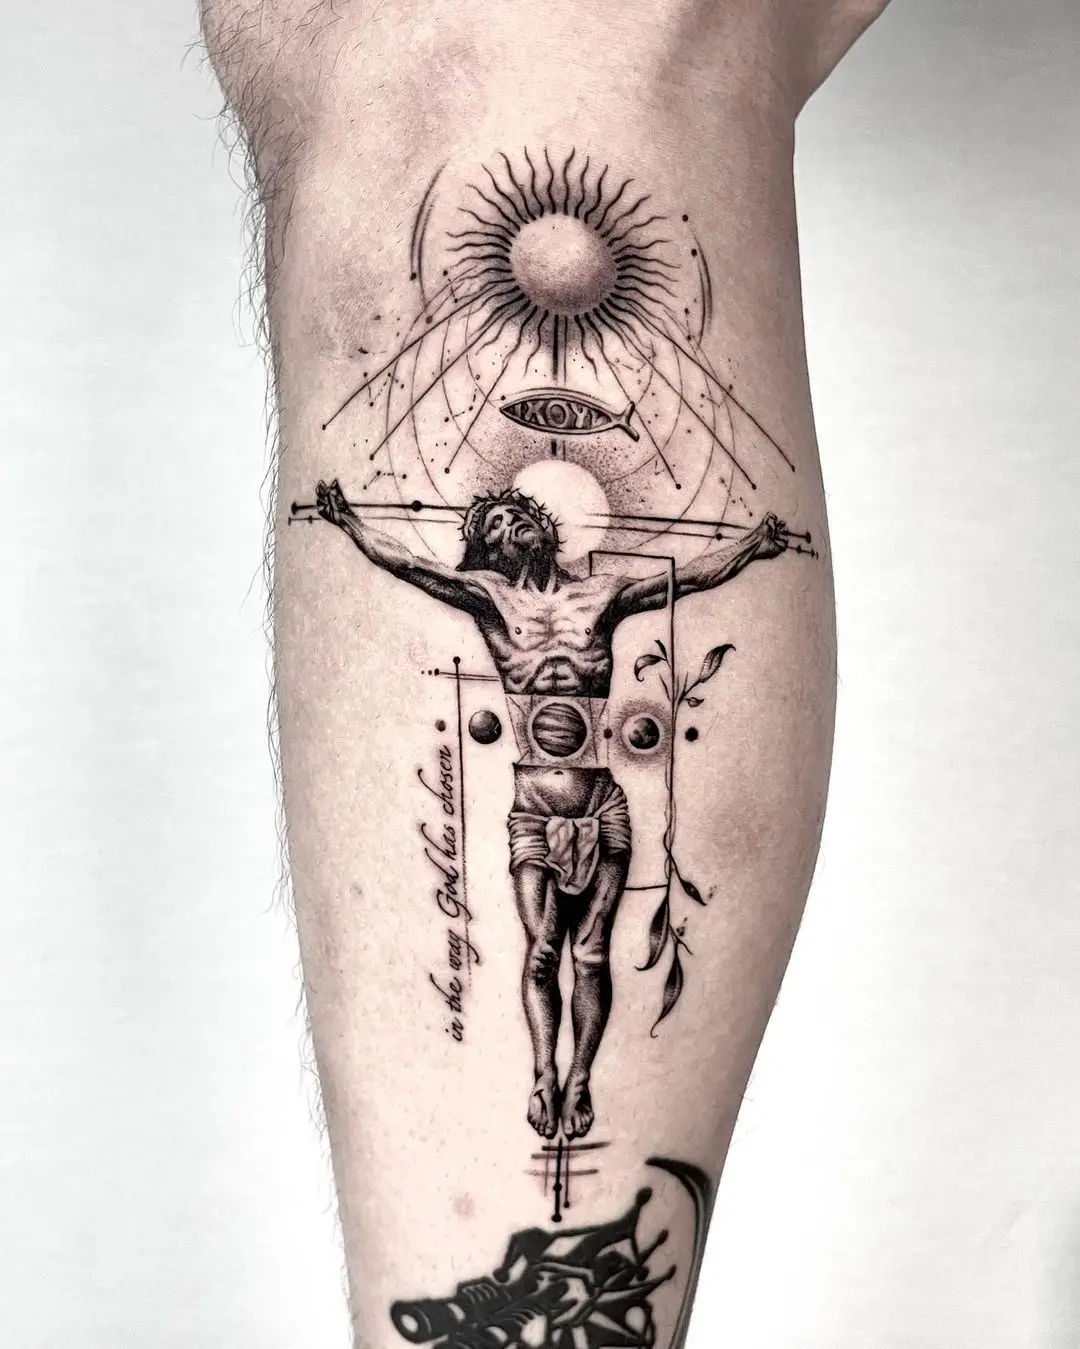 Simple jesus tattoo by even gmt.ink